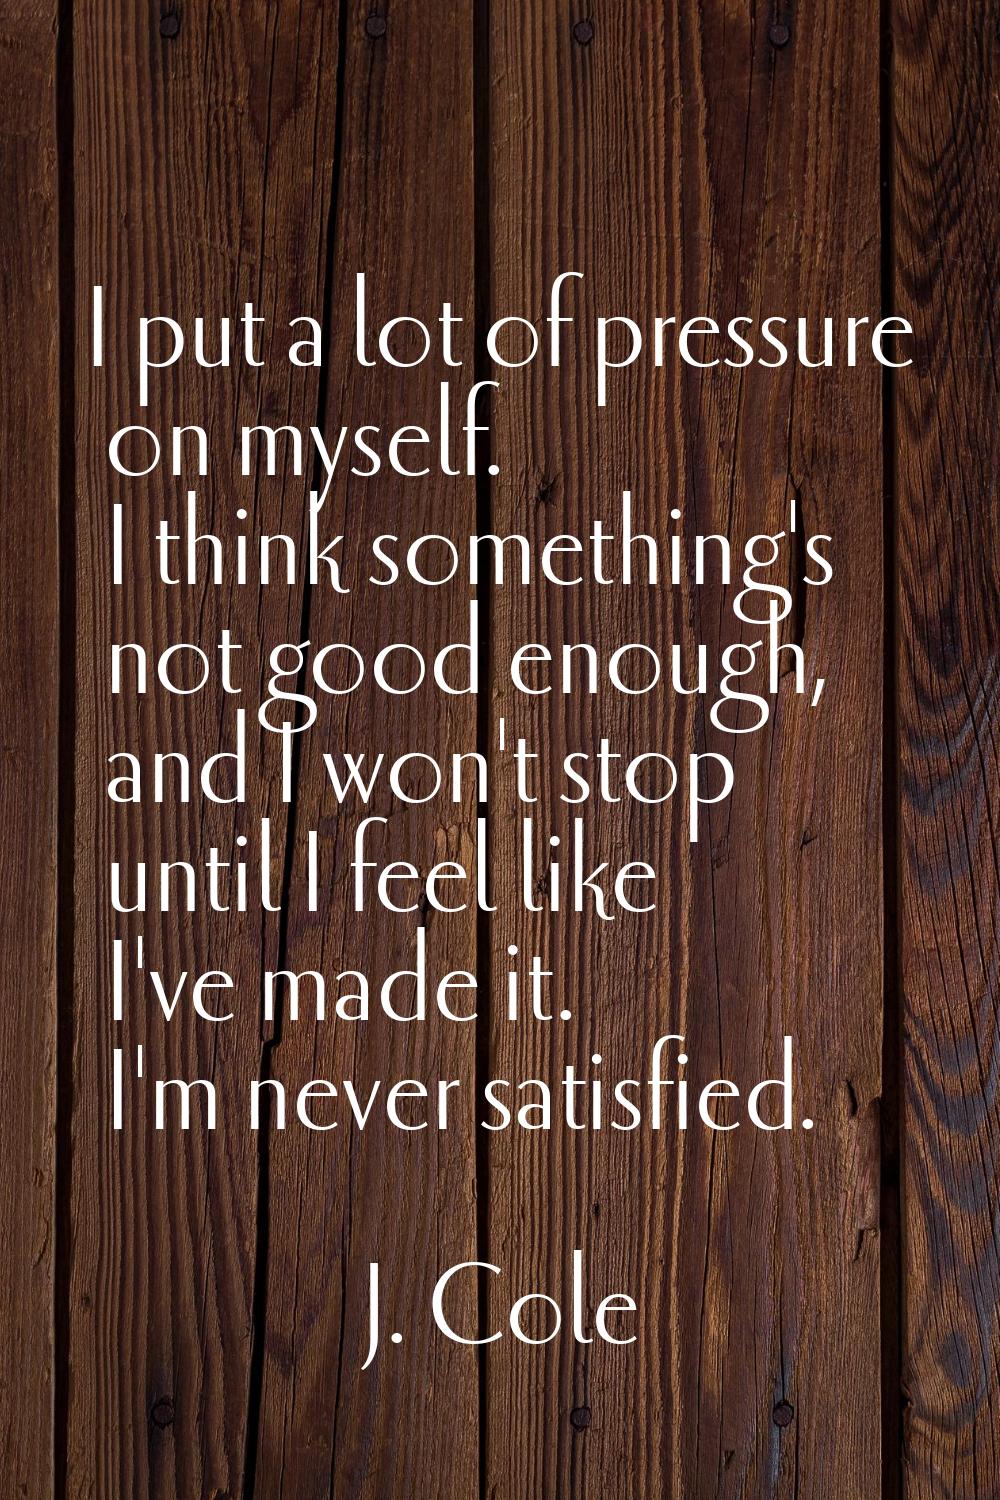 I put a lot of pressure on myself. I think something's not good enough, and I won't stop until I fe